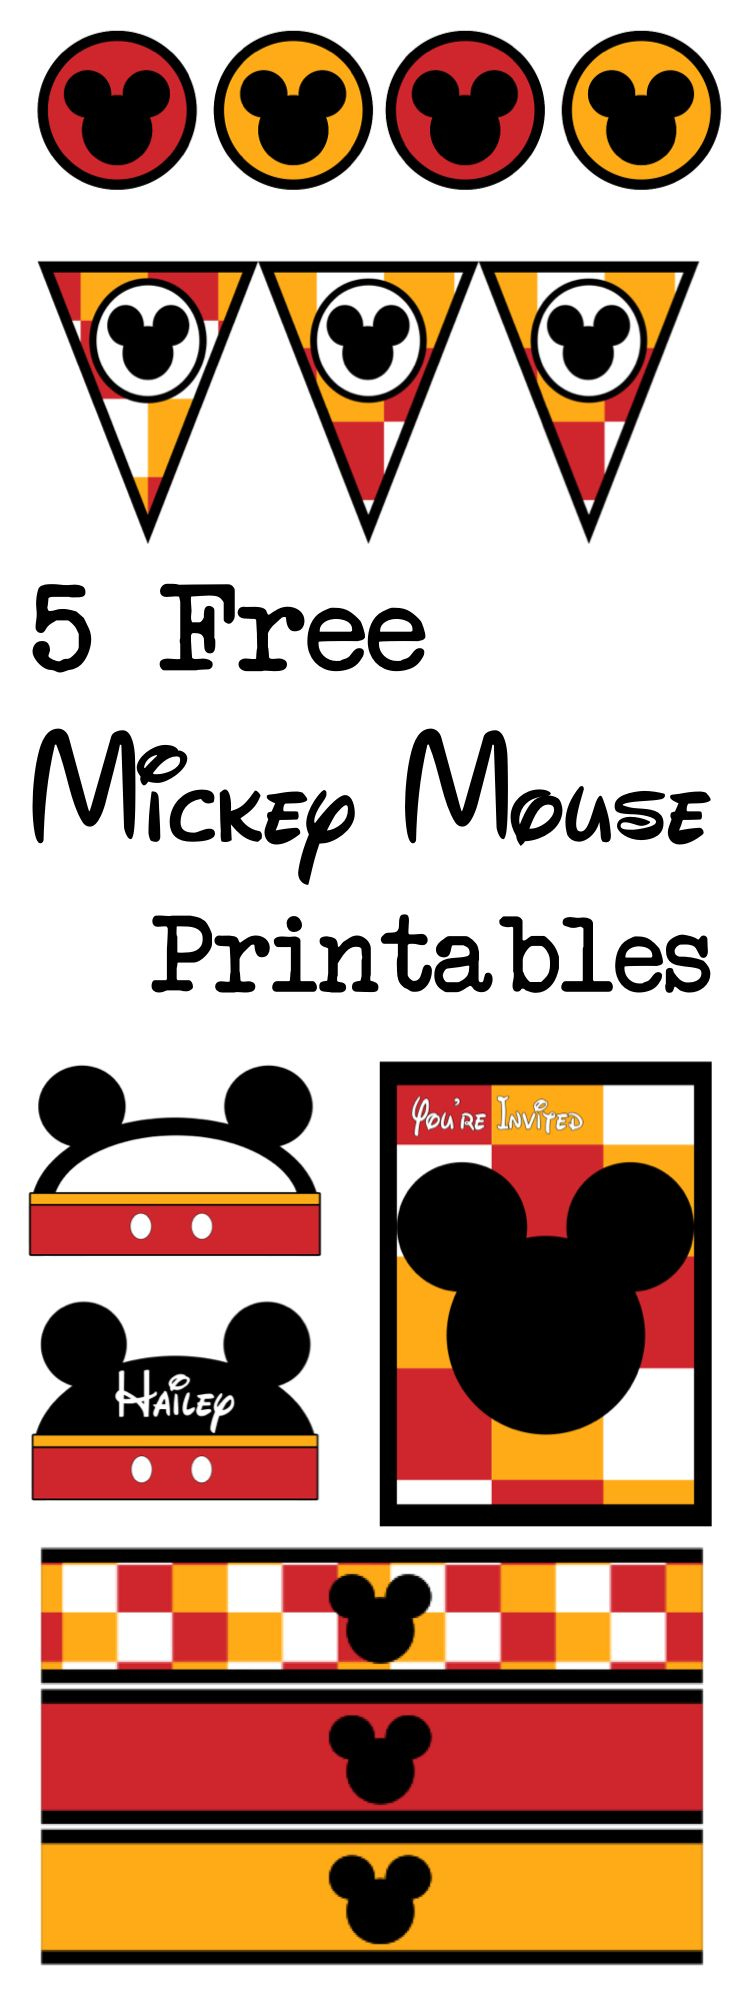 Five Mickey Mouse Free Printables - Paper Trail Design | Free pertaining to Free Printable Mickey Mouse Decorations